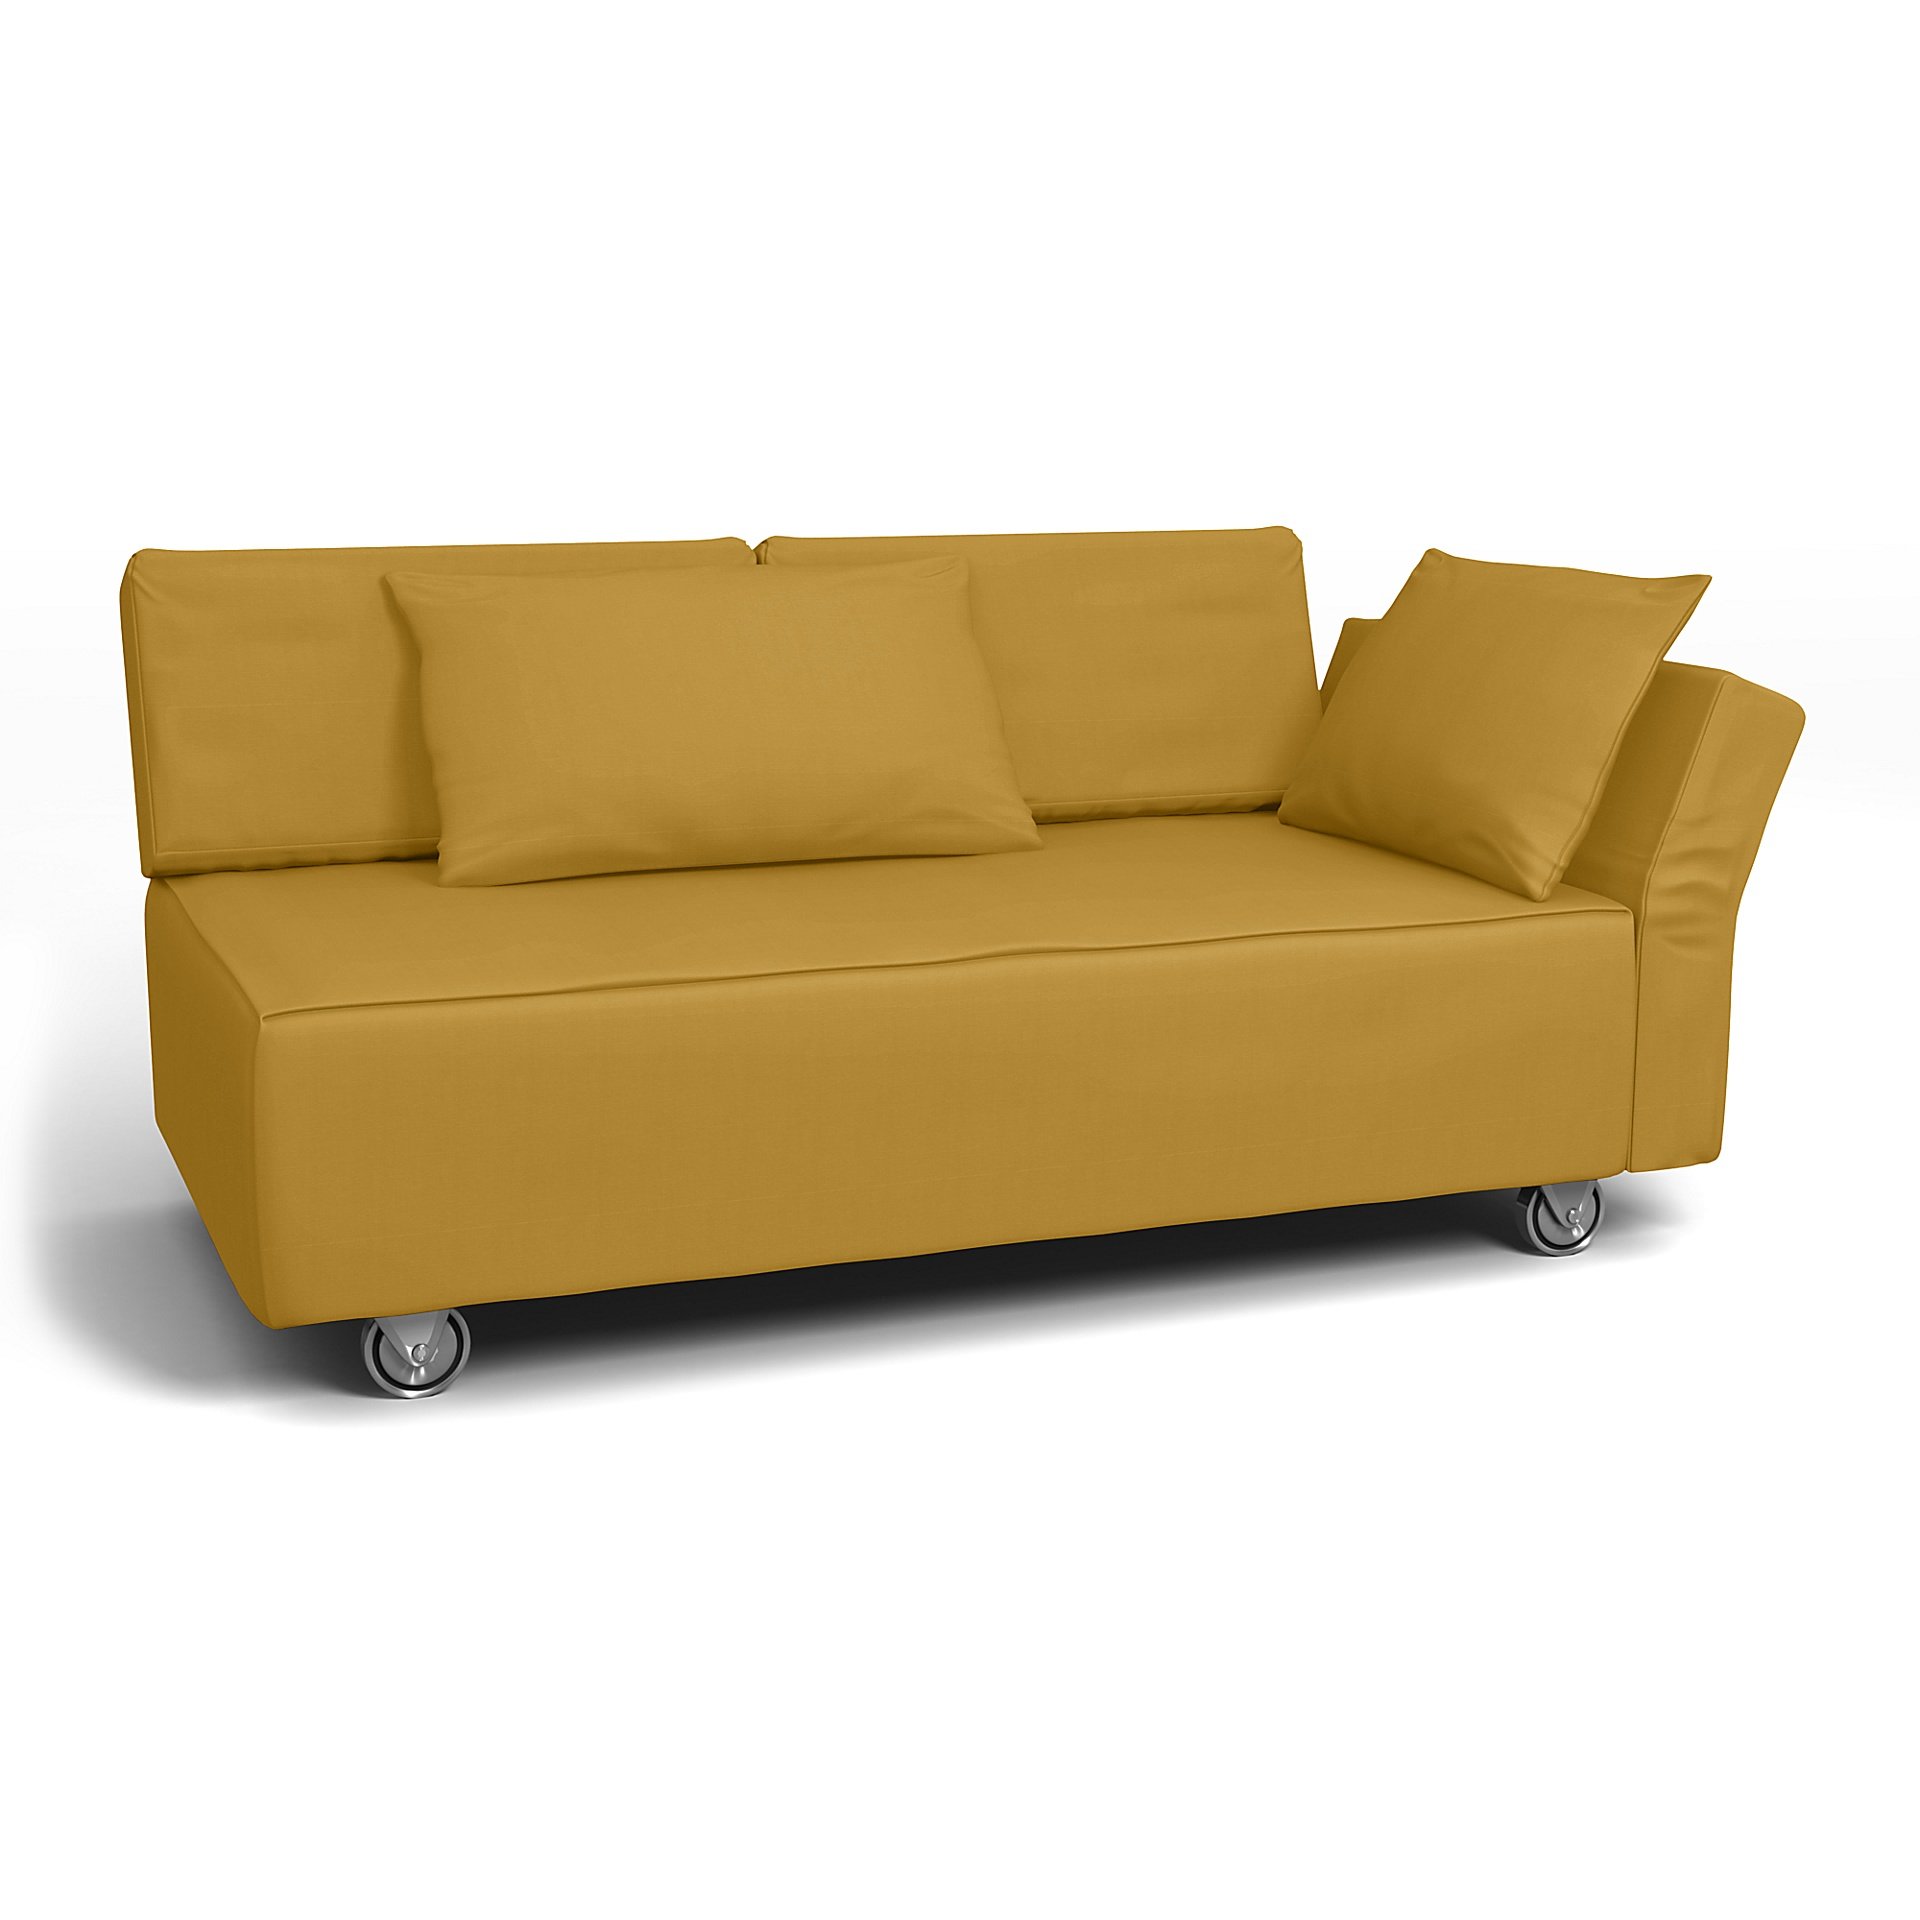 IKEA - Falsterbo 2 Seat Sofa with Right Arm Cover, Honey Mustard, Cotton - Bemz